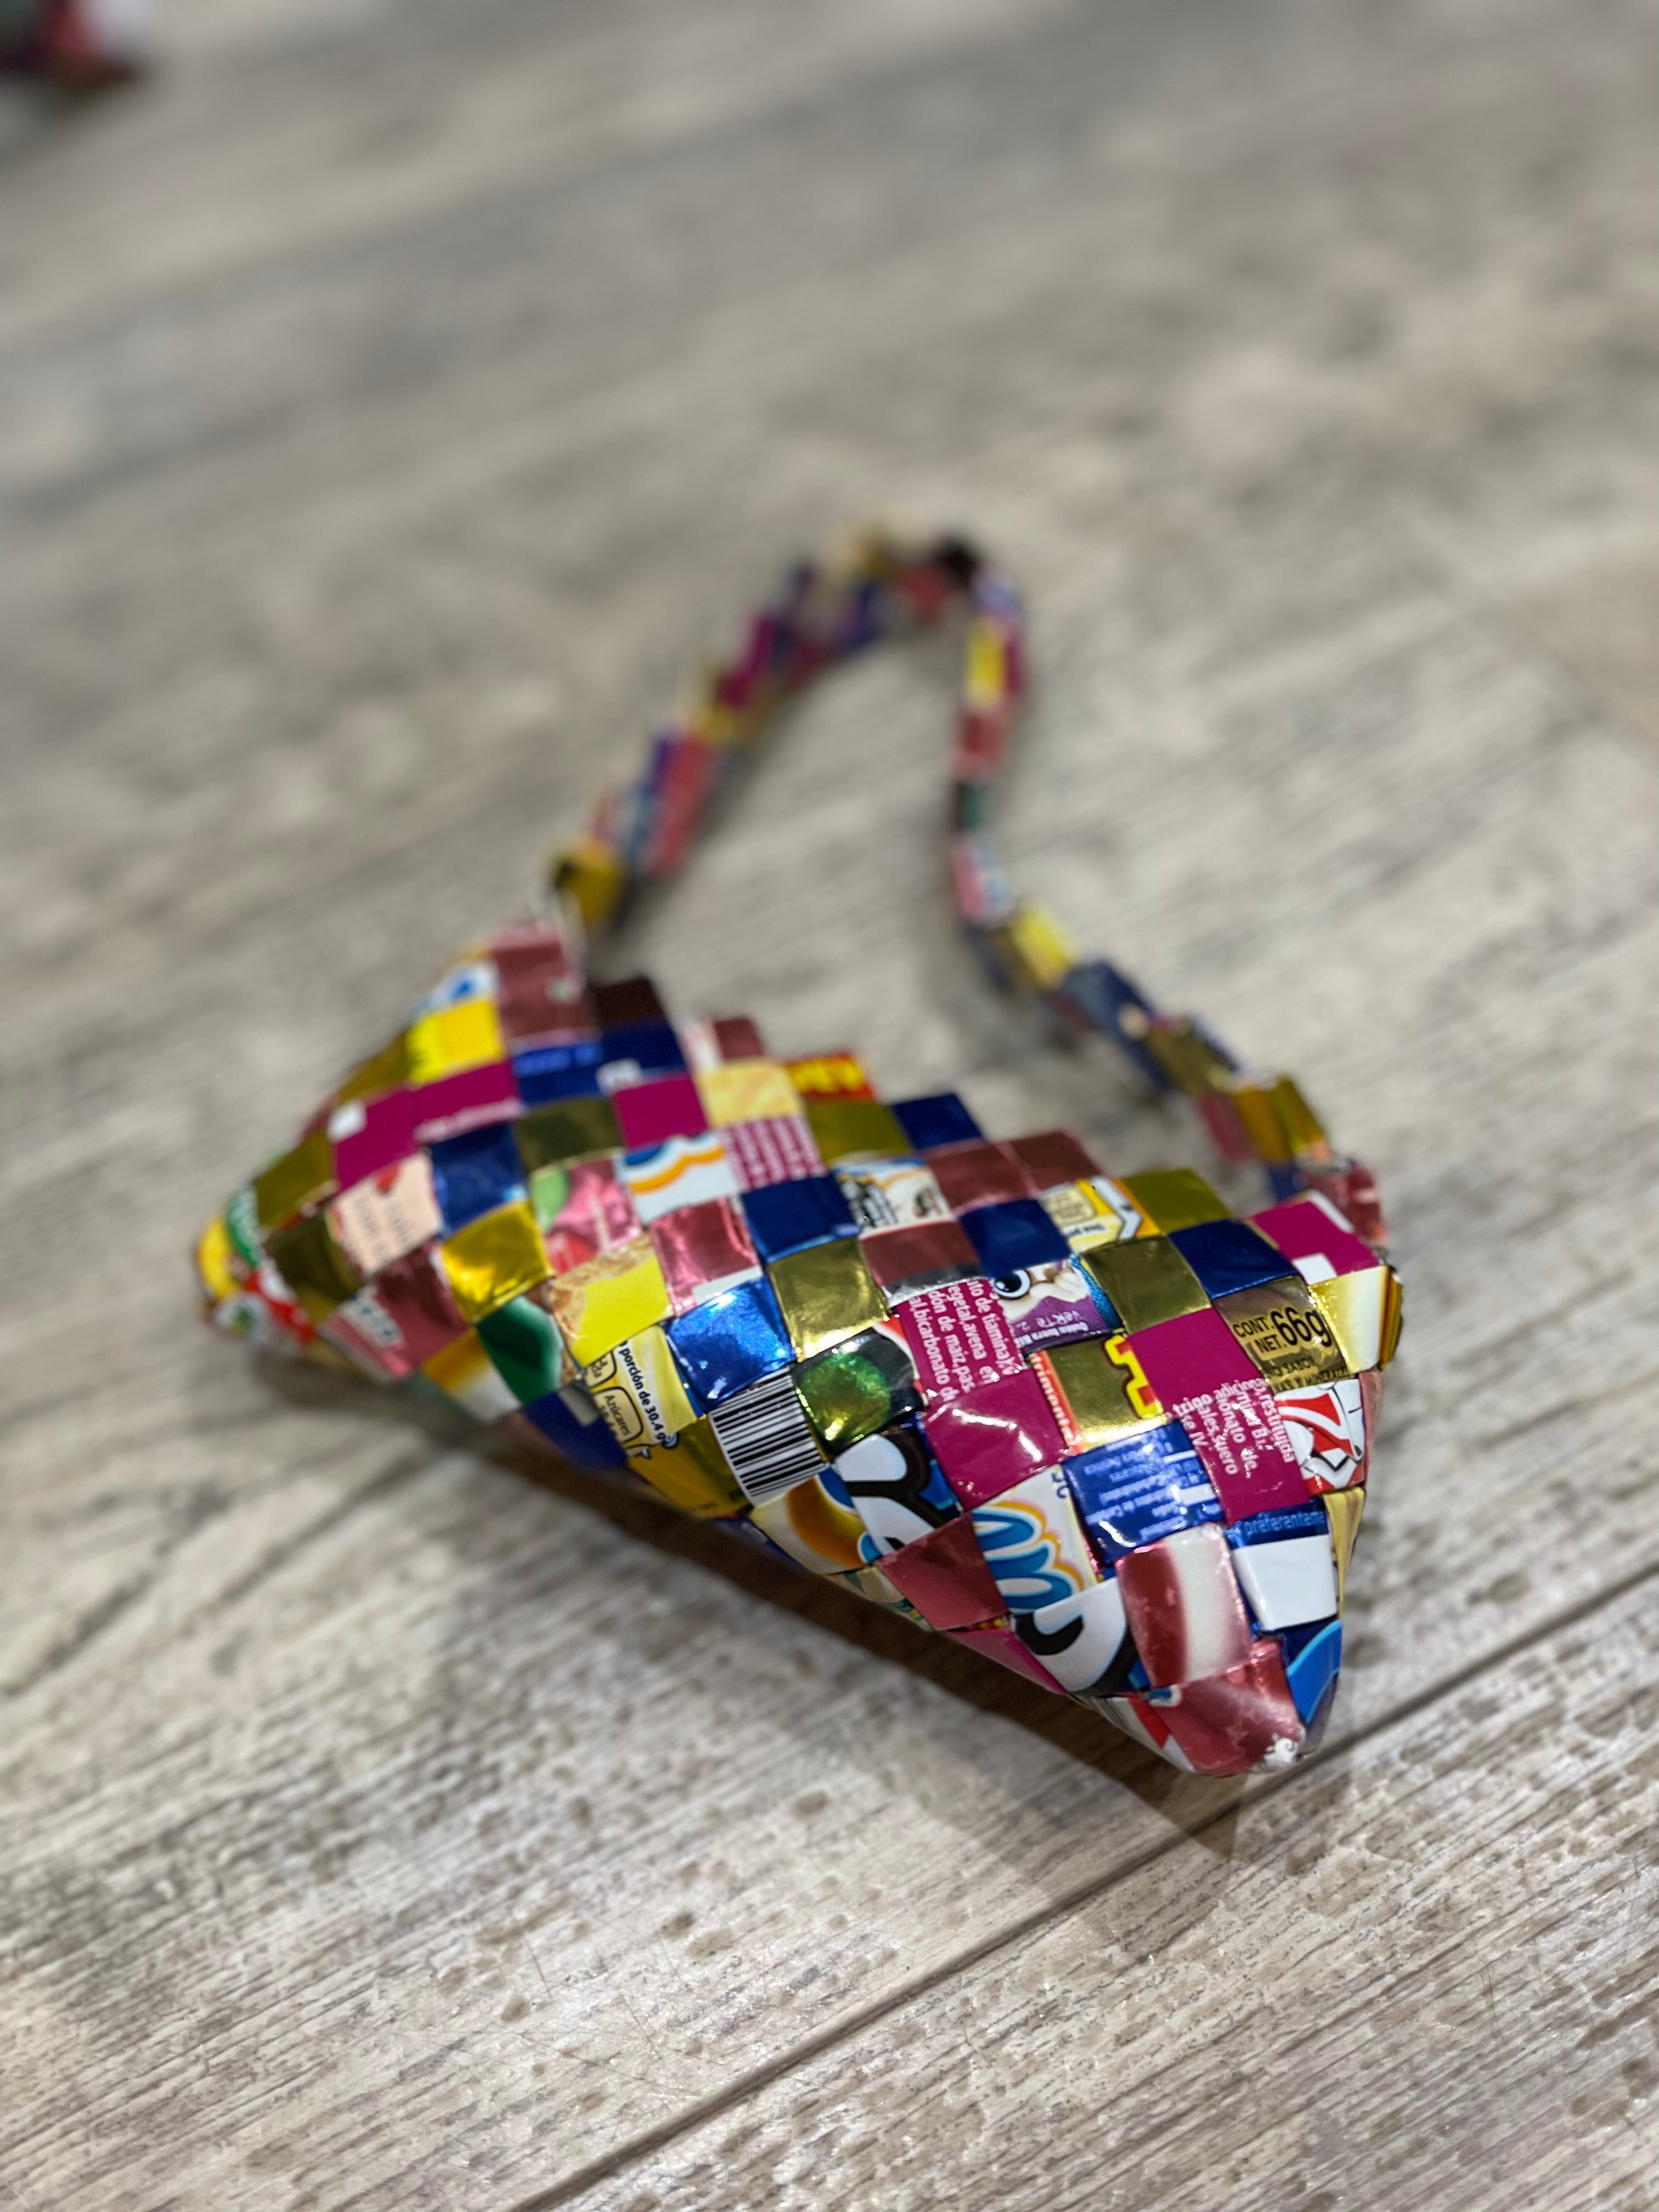 Candy Wrapper Purse / Recycled Woven Handbag / Philippines / KILUS  Foundation / Fair Trade / Women's Co-op / Handcrafted / Eco-friendly - Etsy